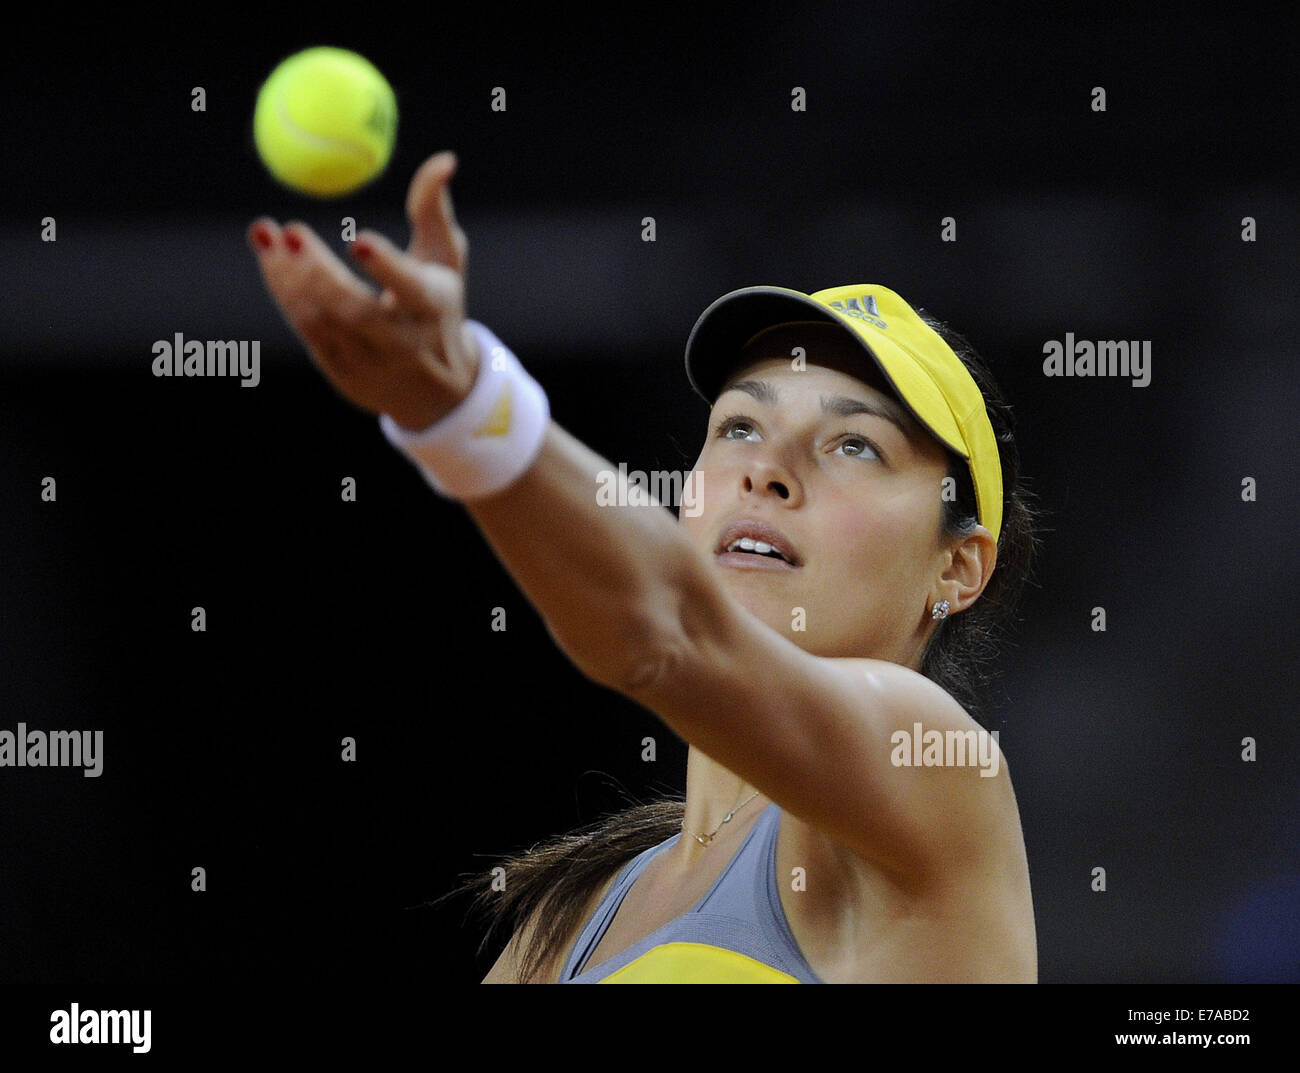 Ana Ivanovic from Serbia serves during the Fed Cup relegation match against Germany's Kerber at Porsche Arena in Stuttgart, Germany, 21 April 2013. Photo: Danile Maurer Stock Photo